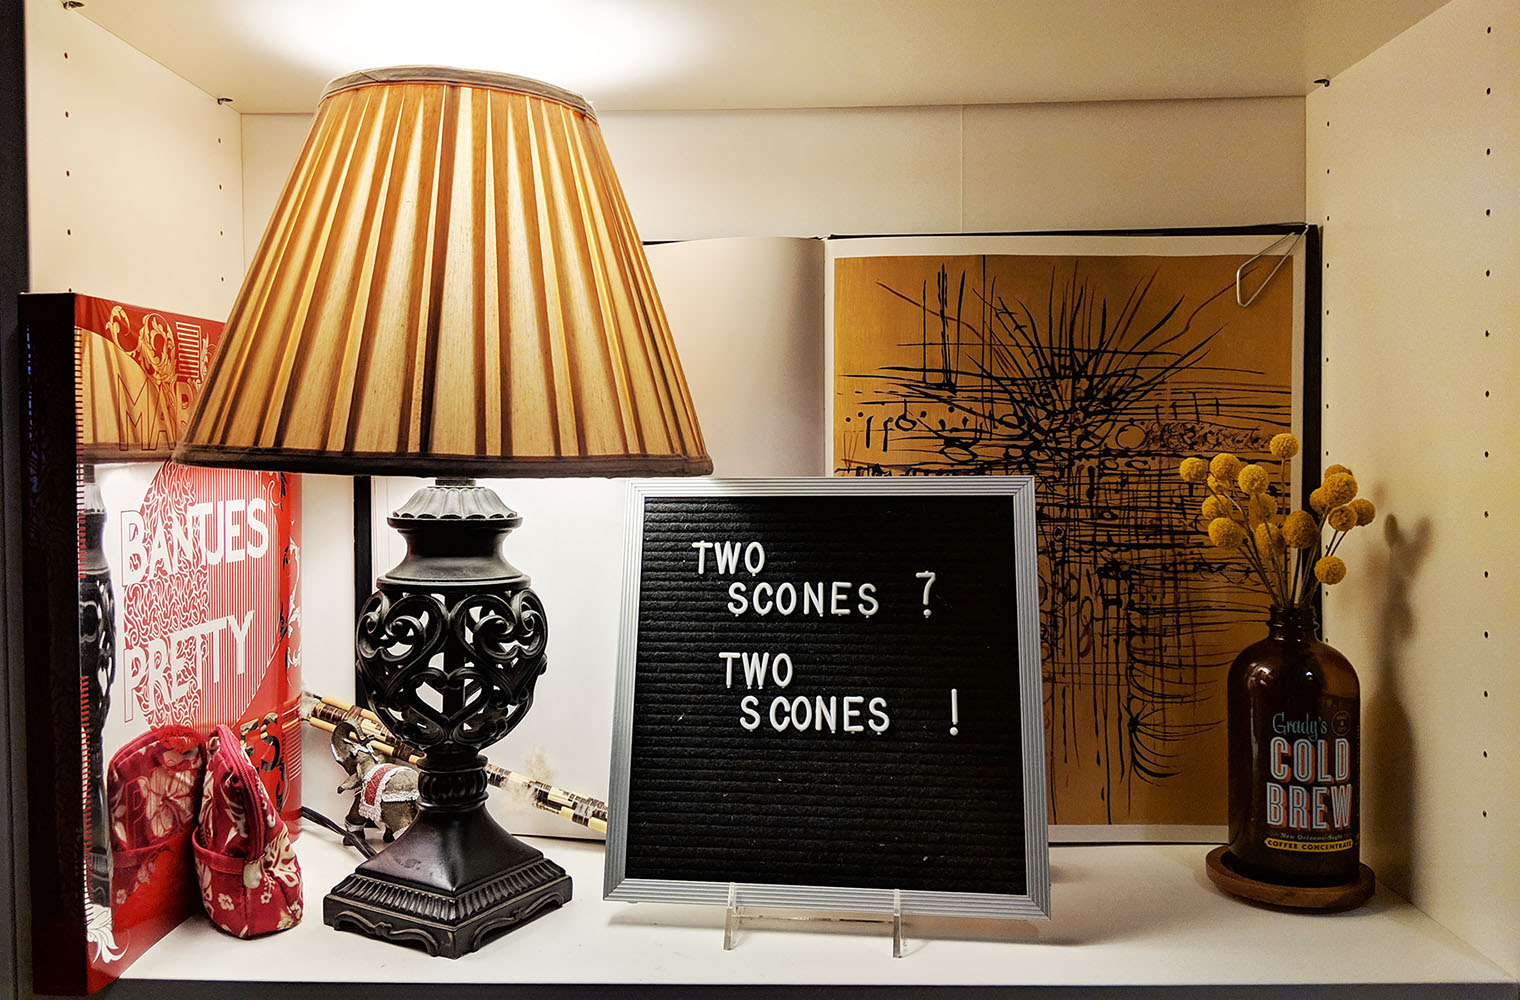 Lamp and 'Two scones?' sign on shelf